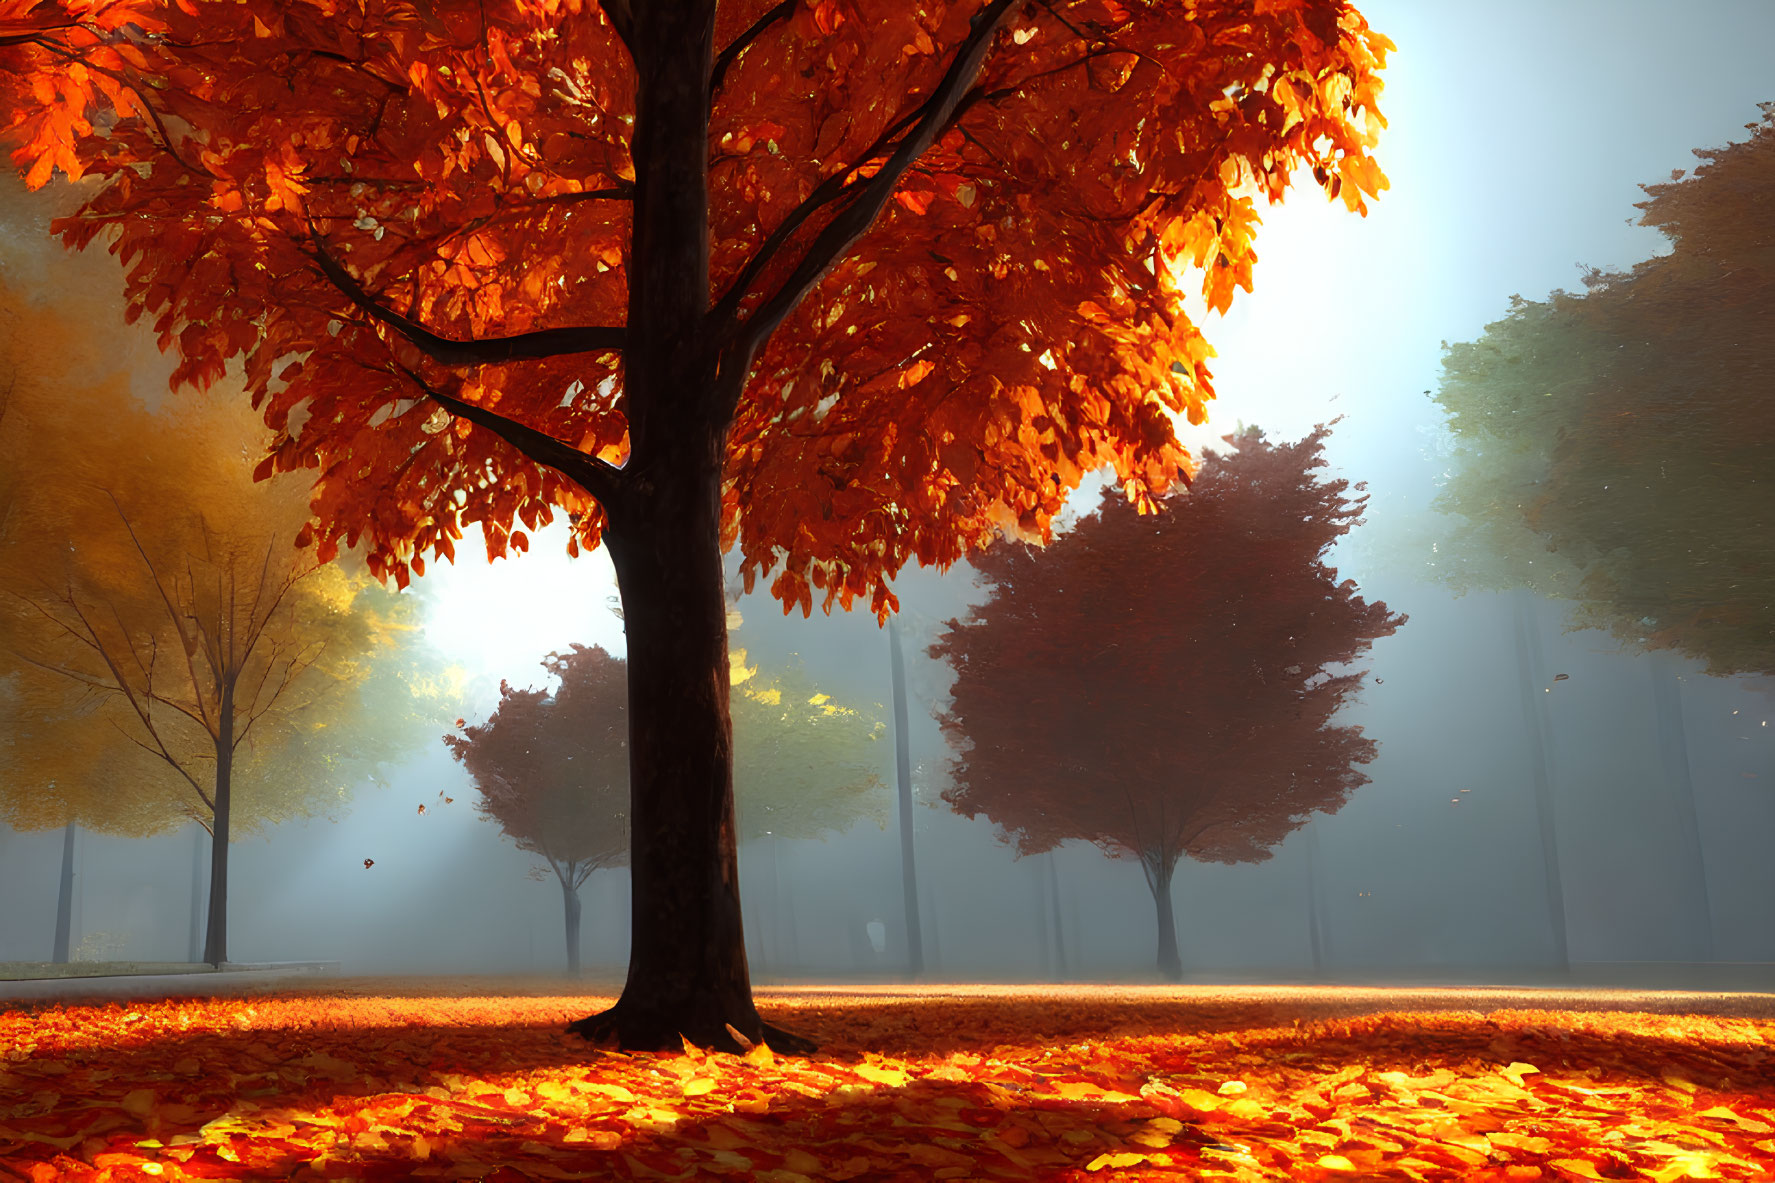 Tranquil autumn landscape with vibrant orange foliage and misty atmosphere